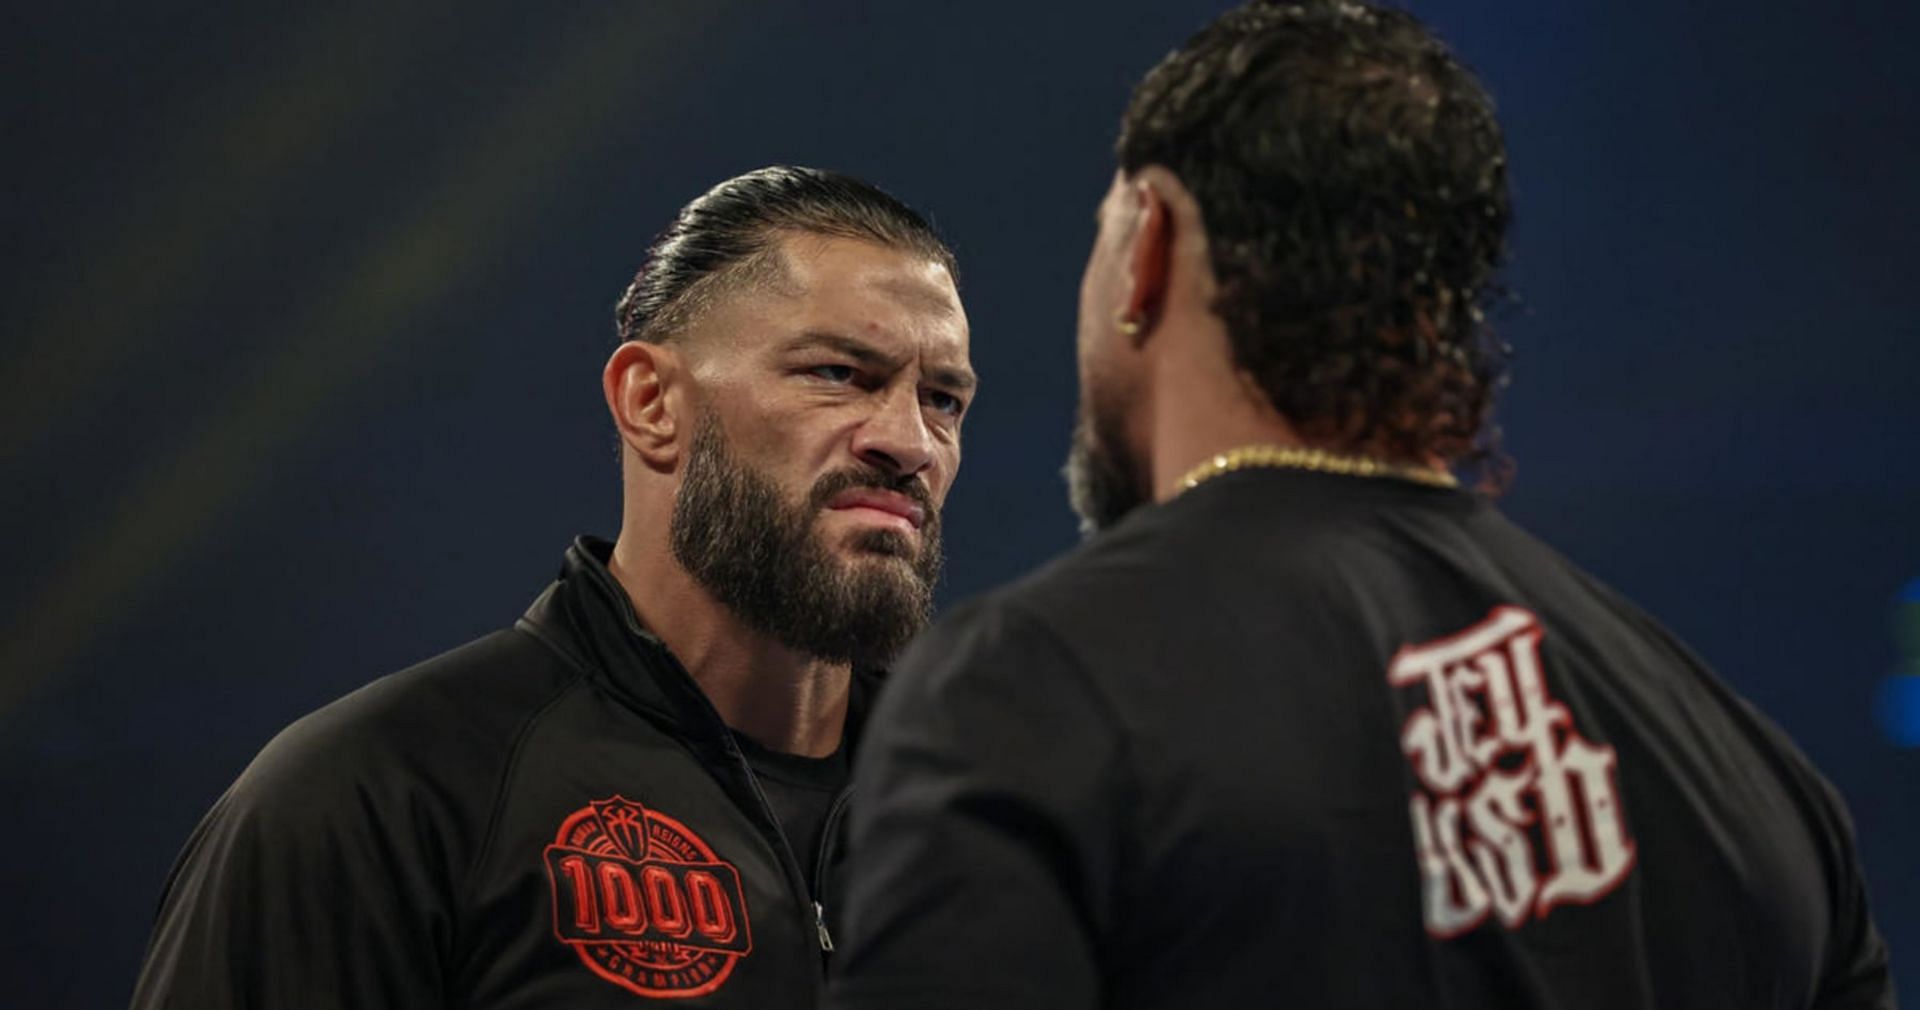 Roman Reigns could use a surprising back-up plan to defeat Jey Uso at WWE SummerSlam 2023